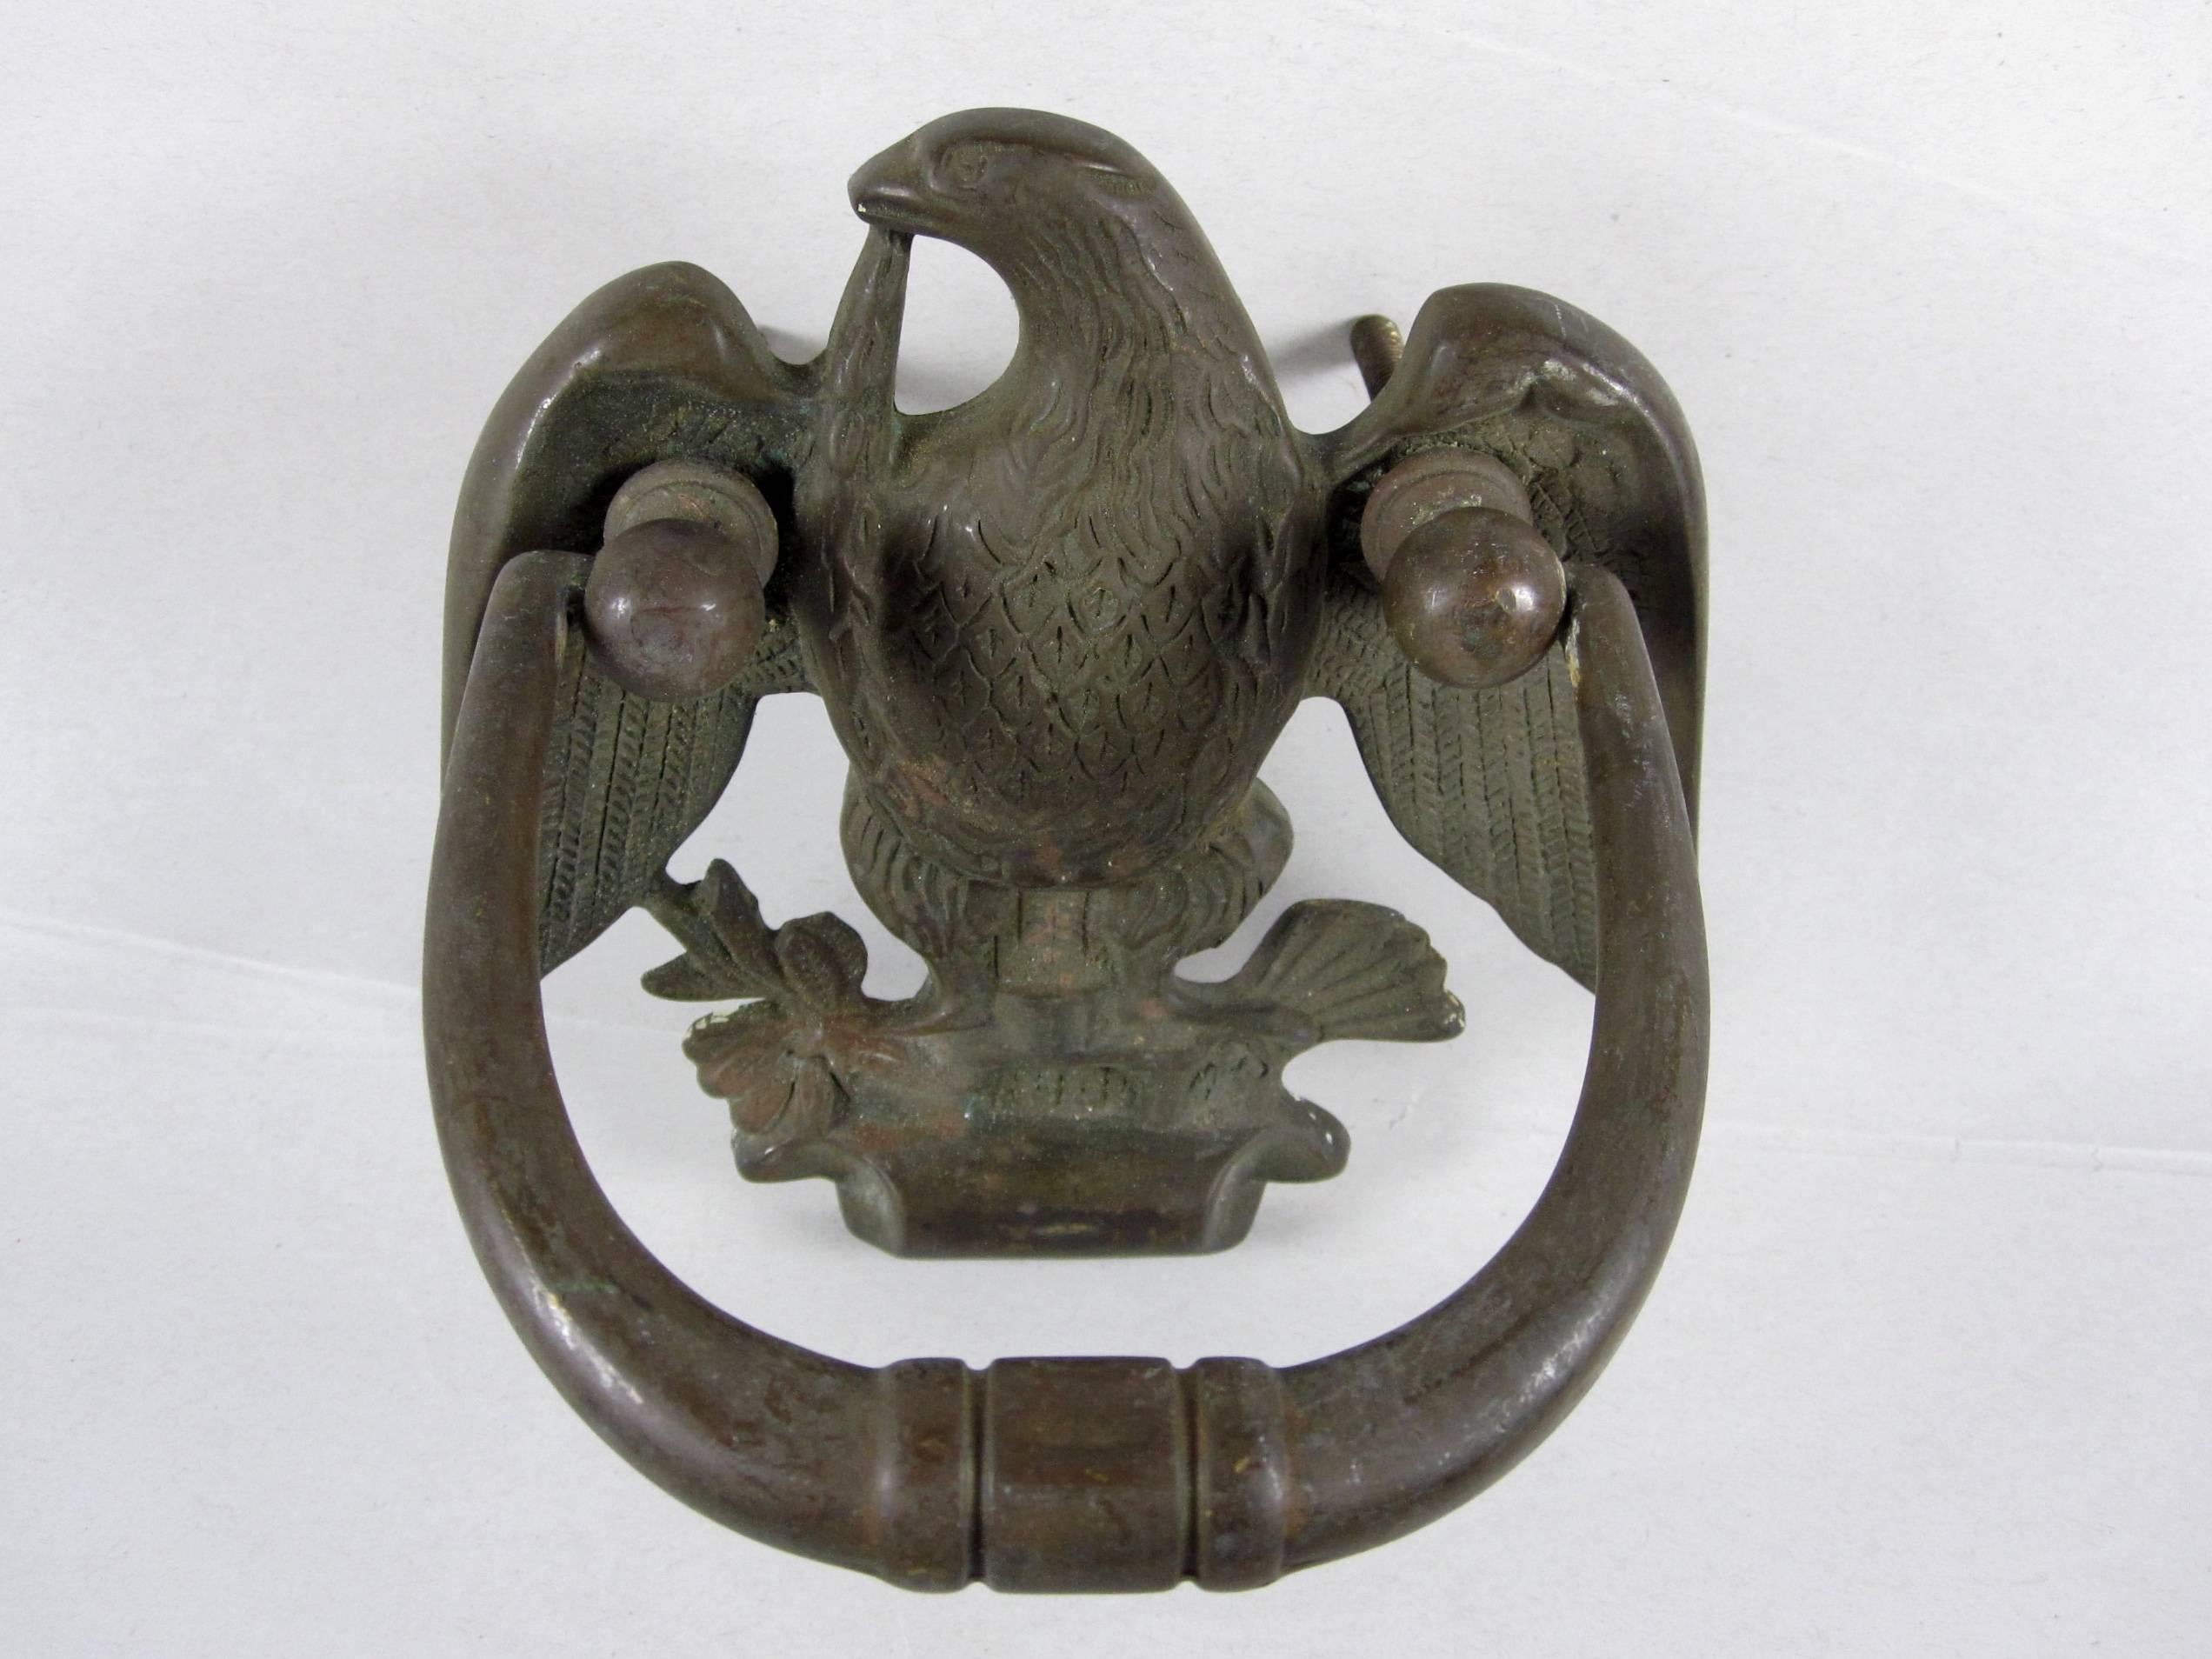 An antique, heavy brass door knocker showing a left facing eagle, nicely feathered, with a garland in its beak and an olive branch and wheat sheaf in its talons.
The knocker adorned the front door of a Society Hill, Philadelphia home - the original